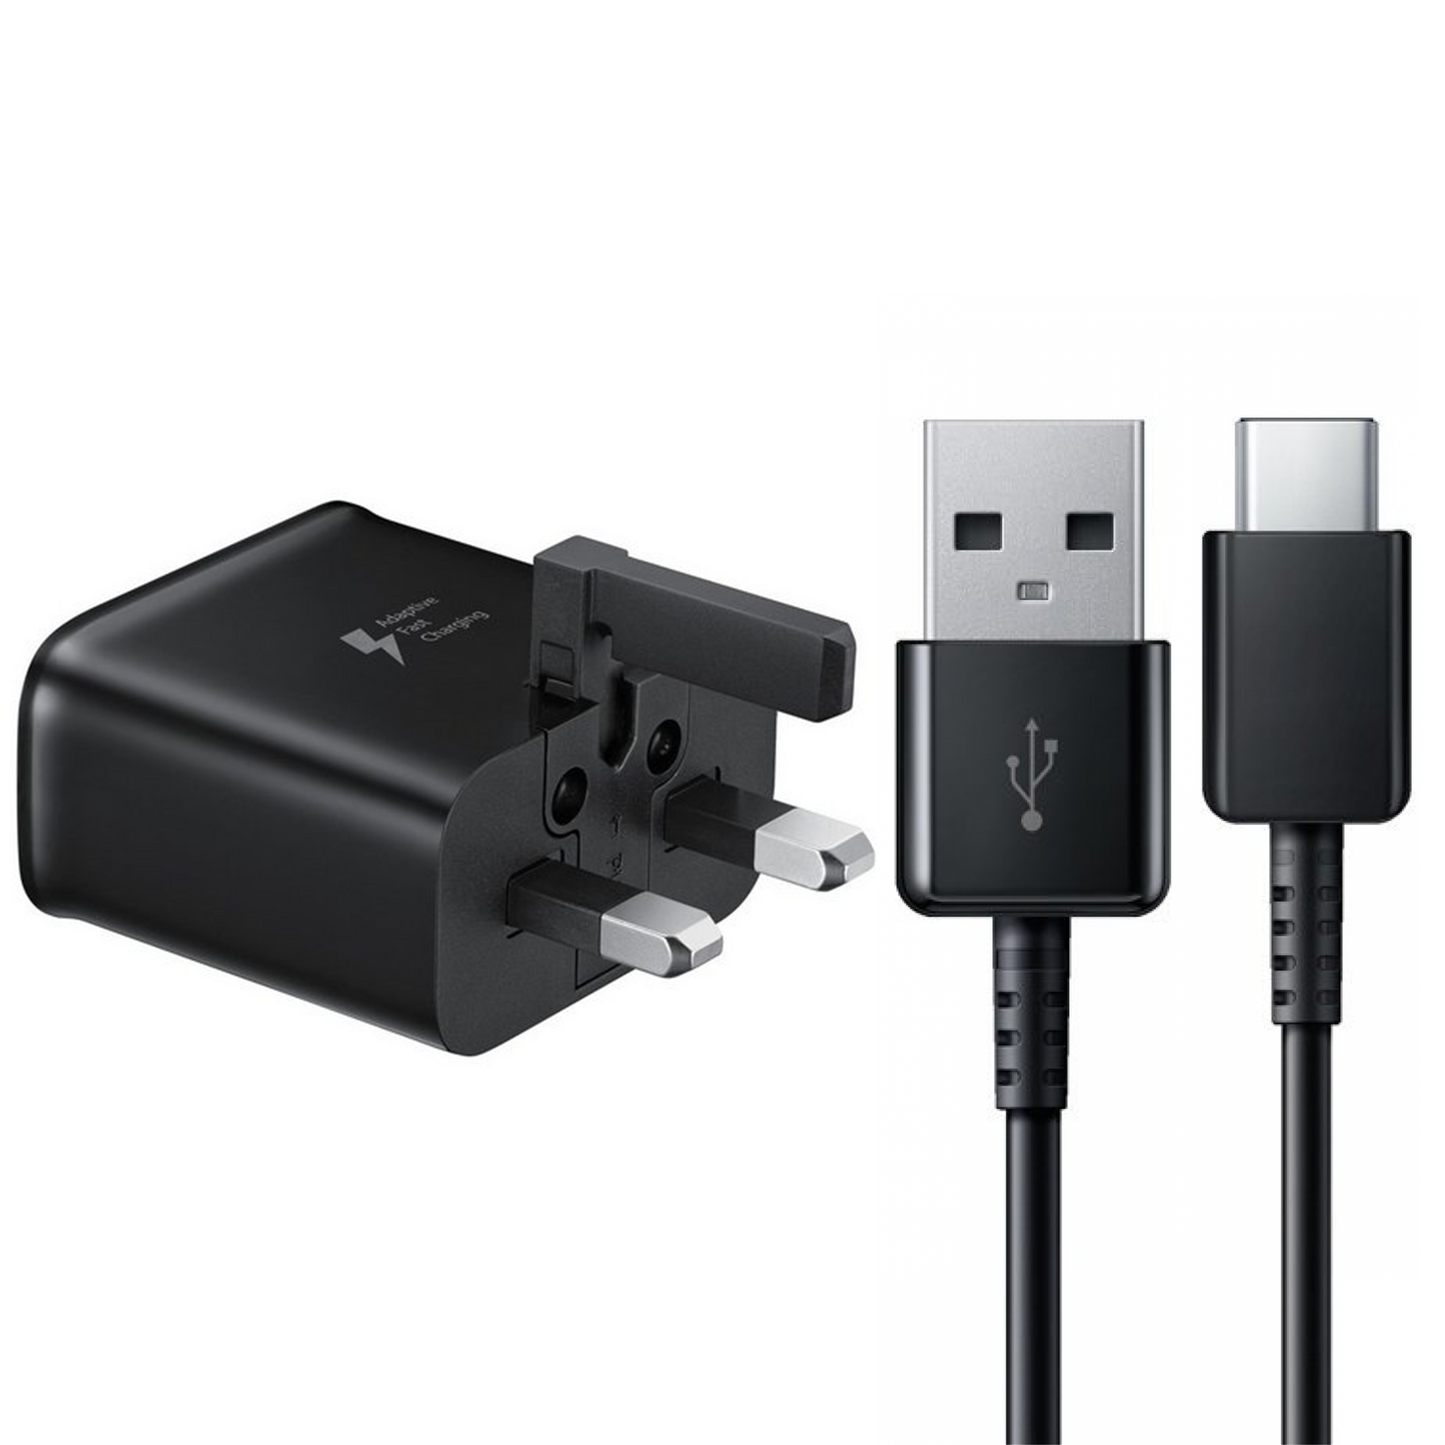 Genuine Samsung Galaxy S8 S9 Plus S10 Fast Adaptive Charger Mains Plug and USB Type C Charge & Sync Cable